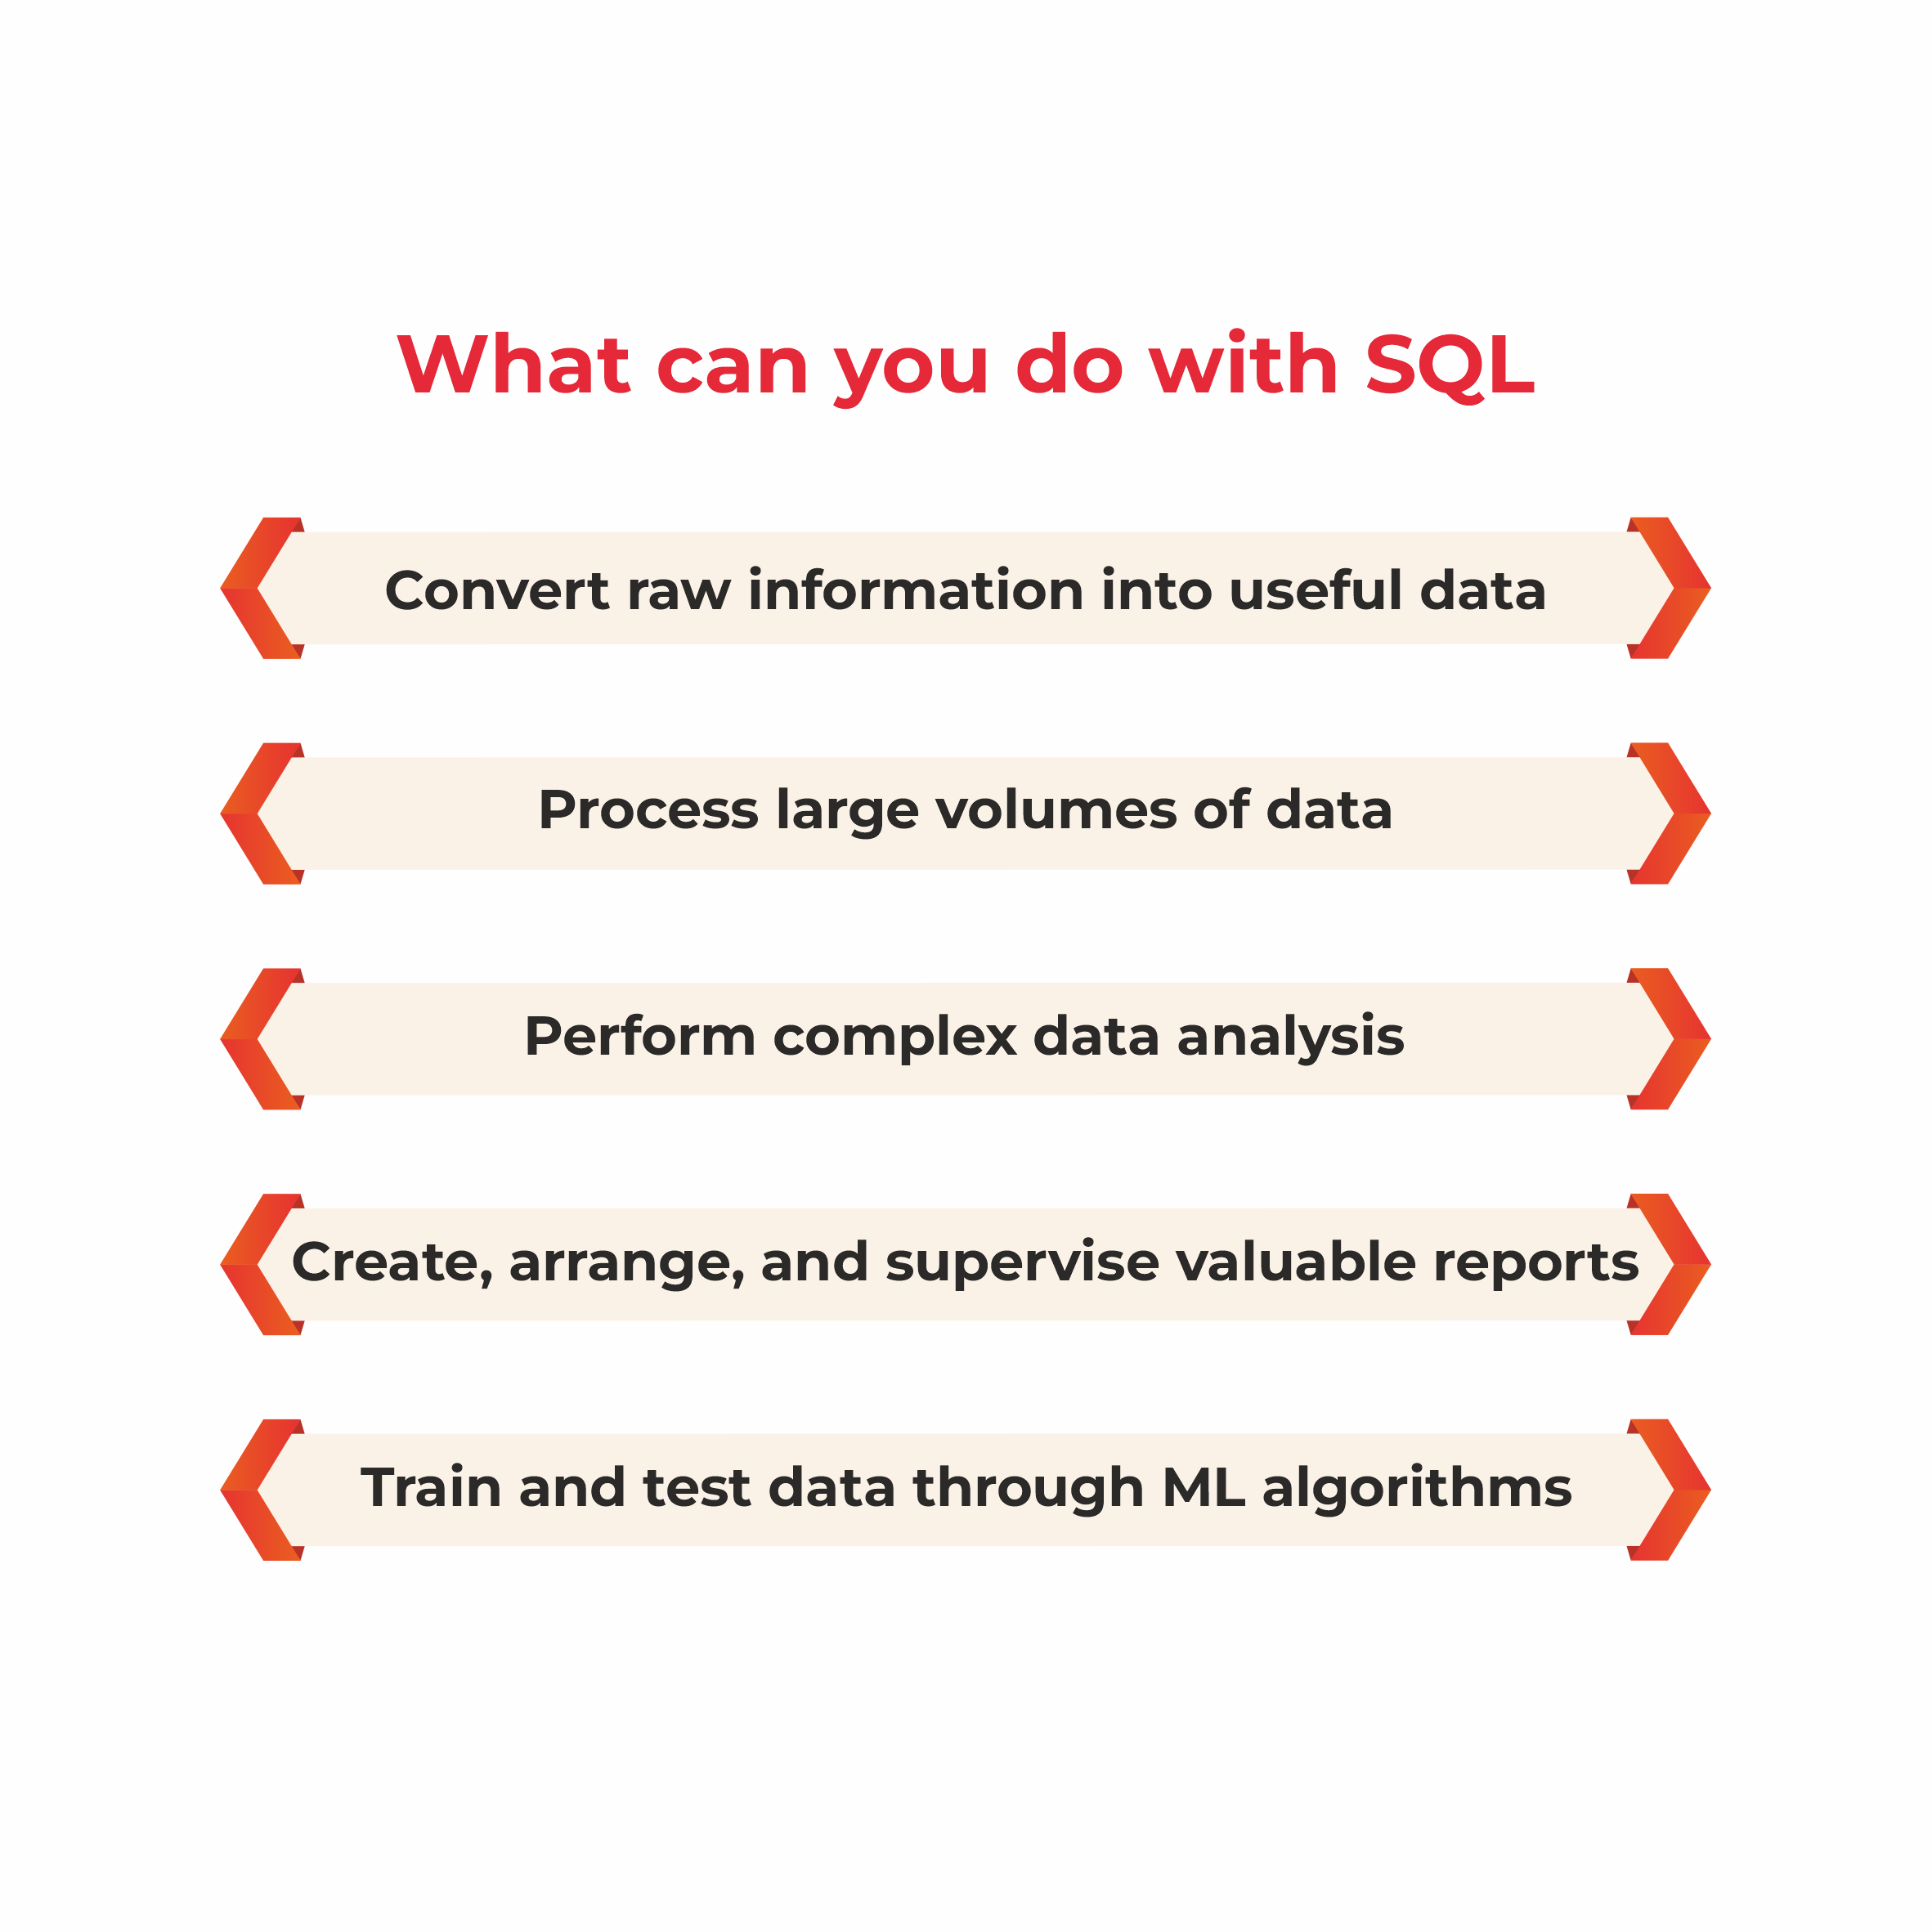 What can you do with SQL